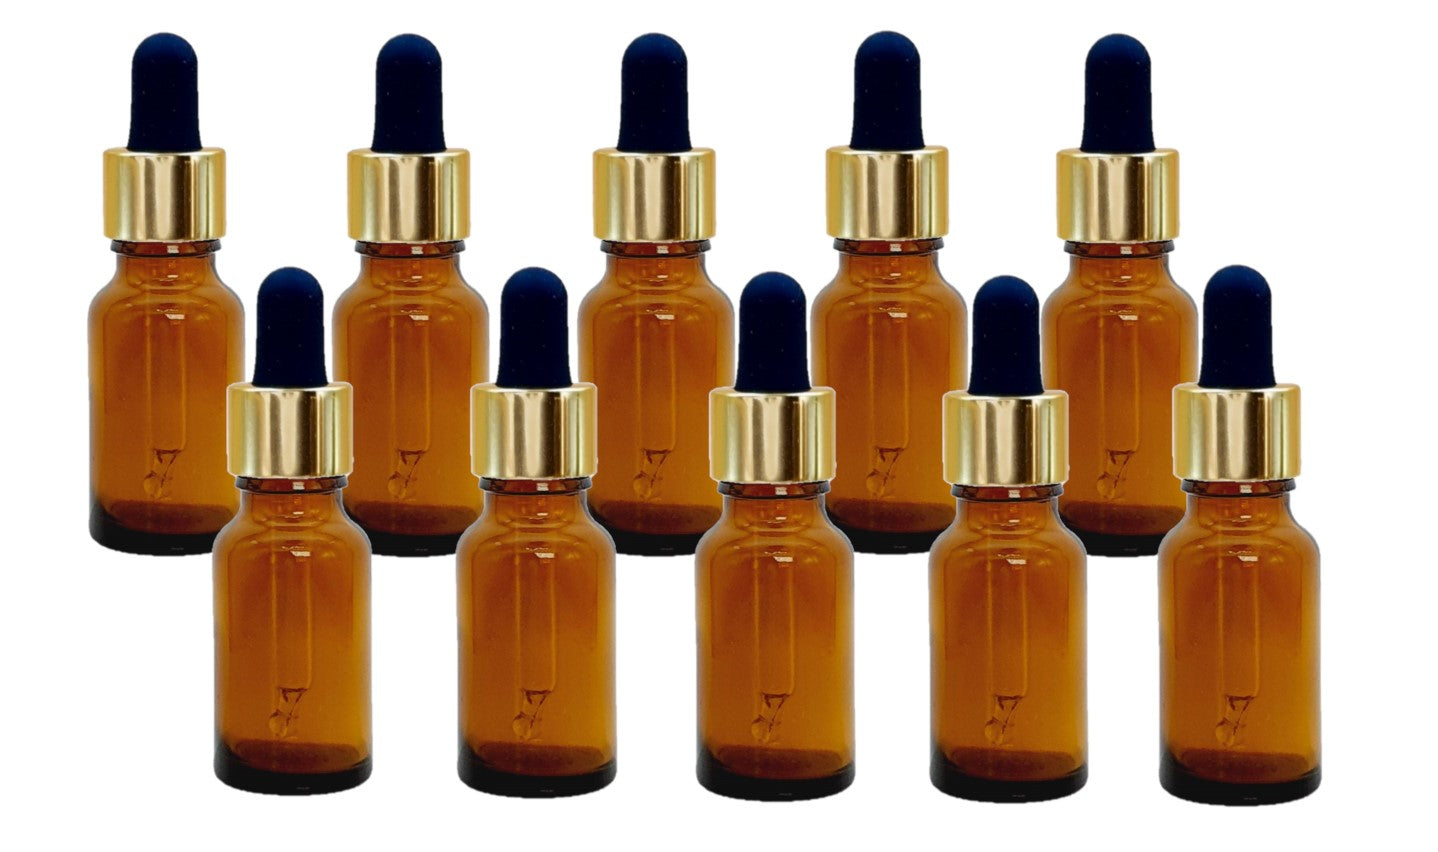 15ml Amber Glass Bottles with Gold/Black Glass Pipettes